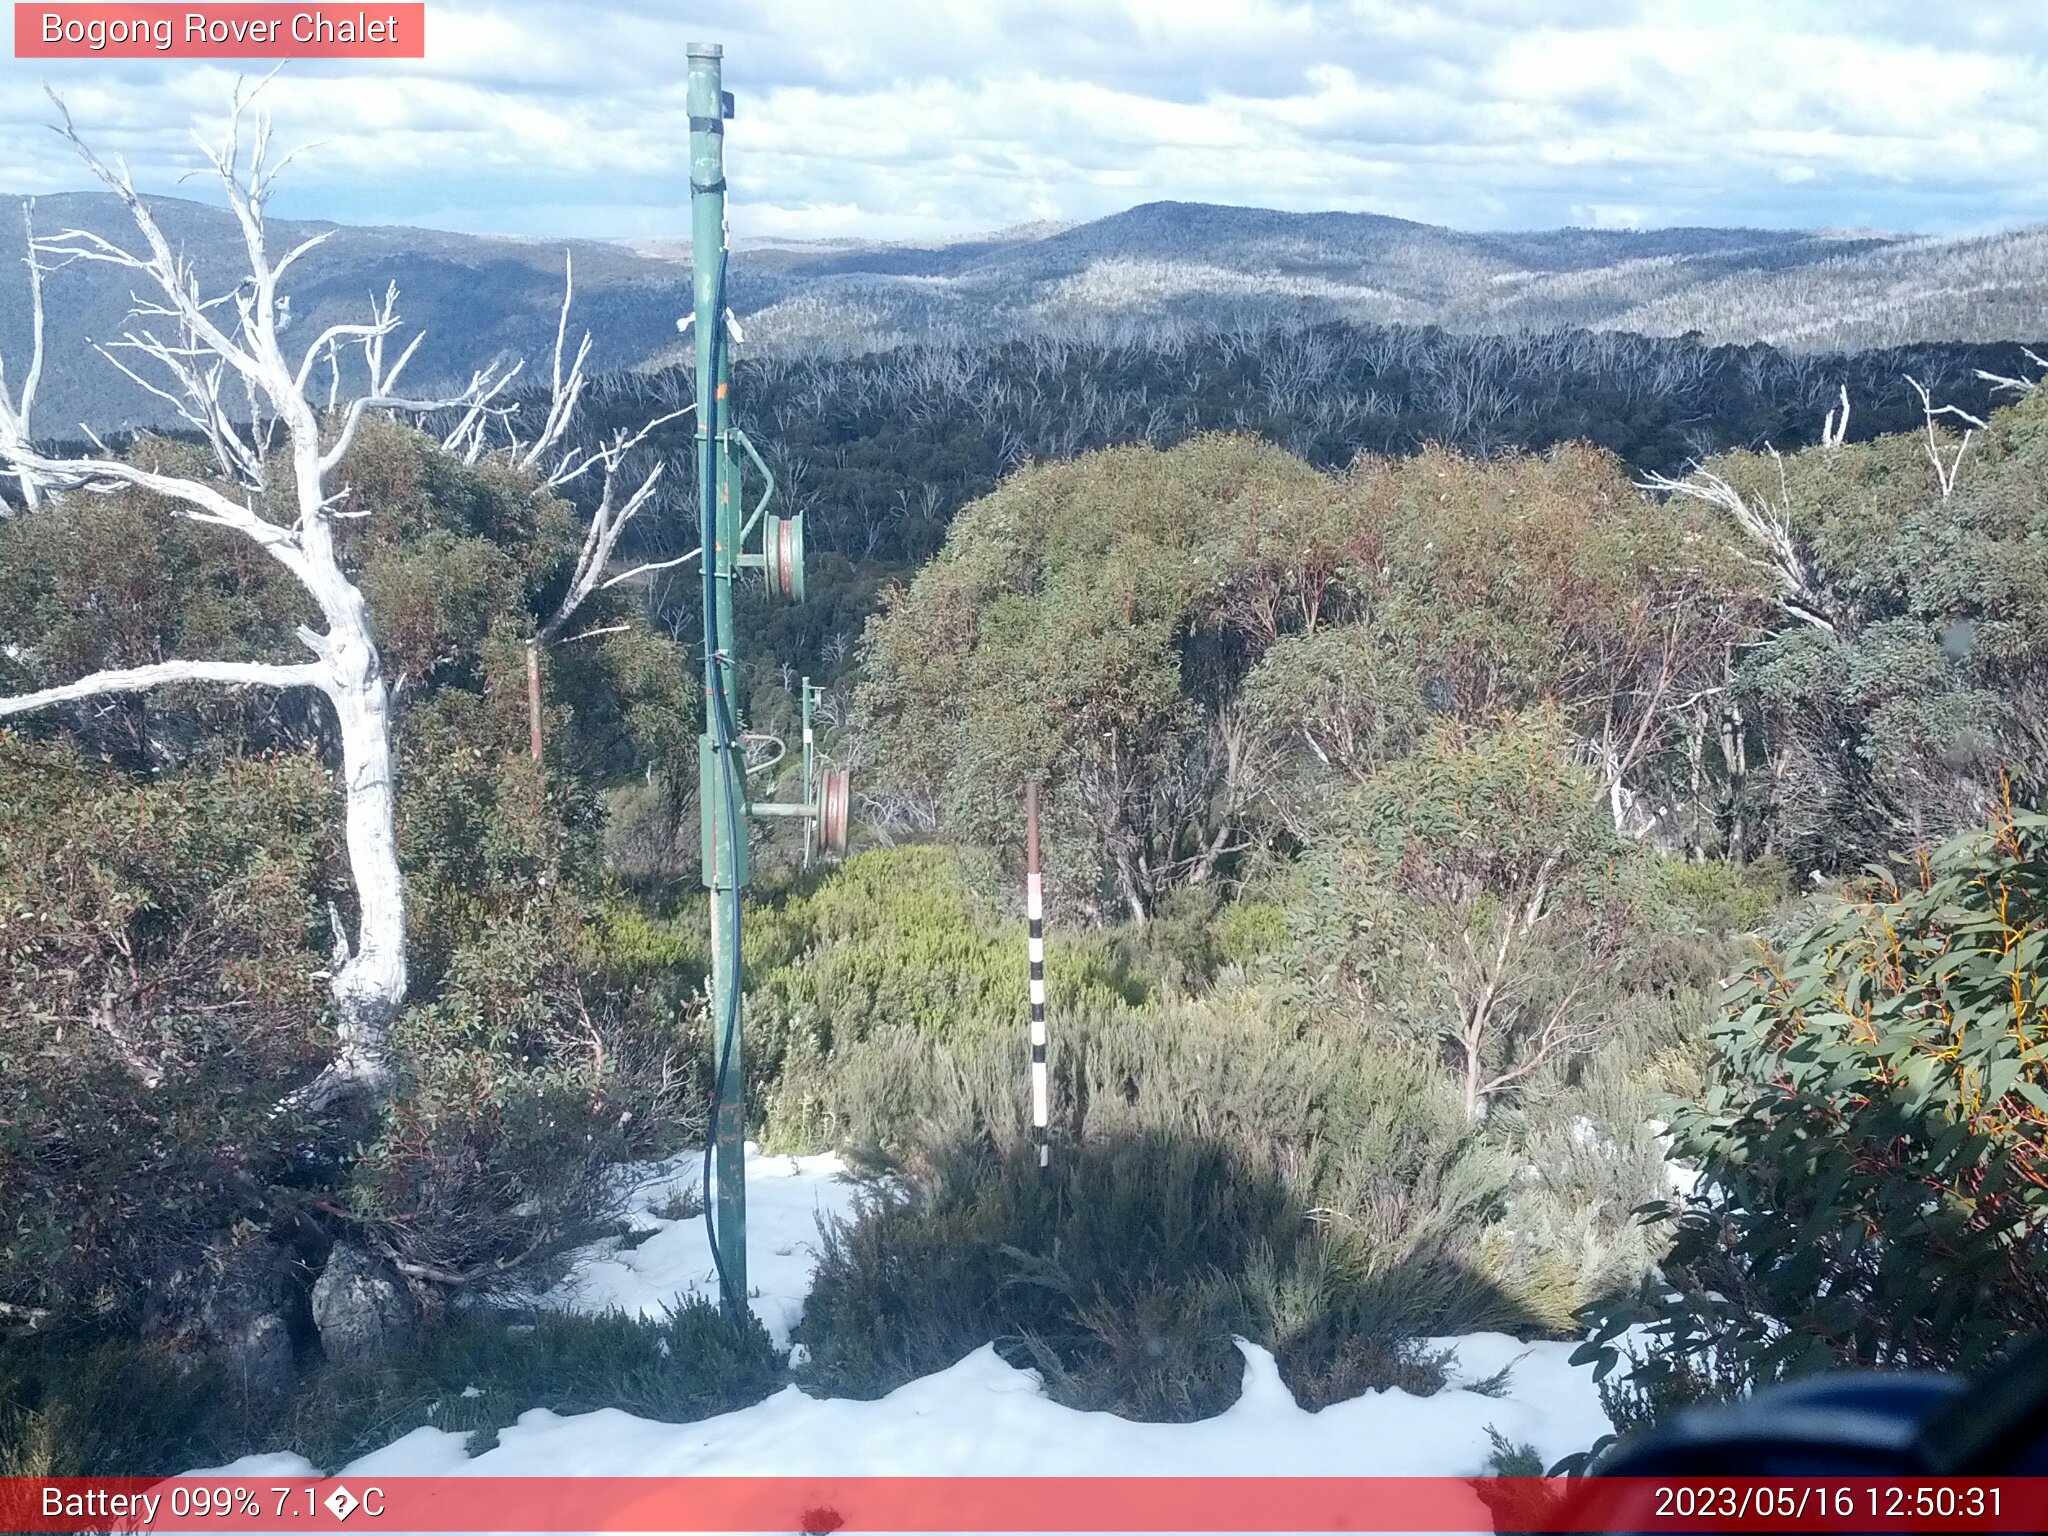 Bogong Web Cam 12:50pm Tuesday 16th of May 2023